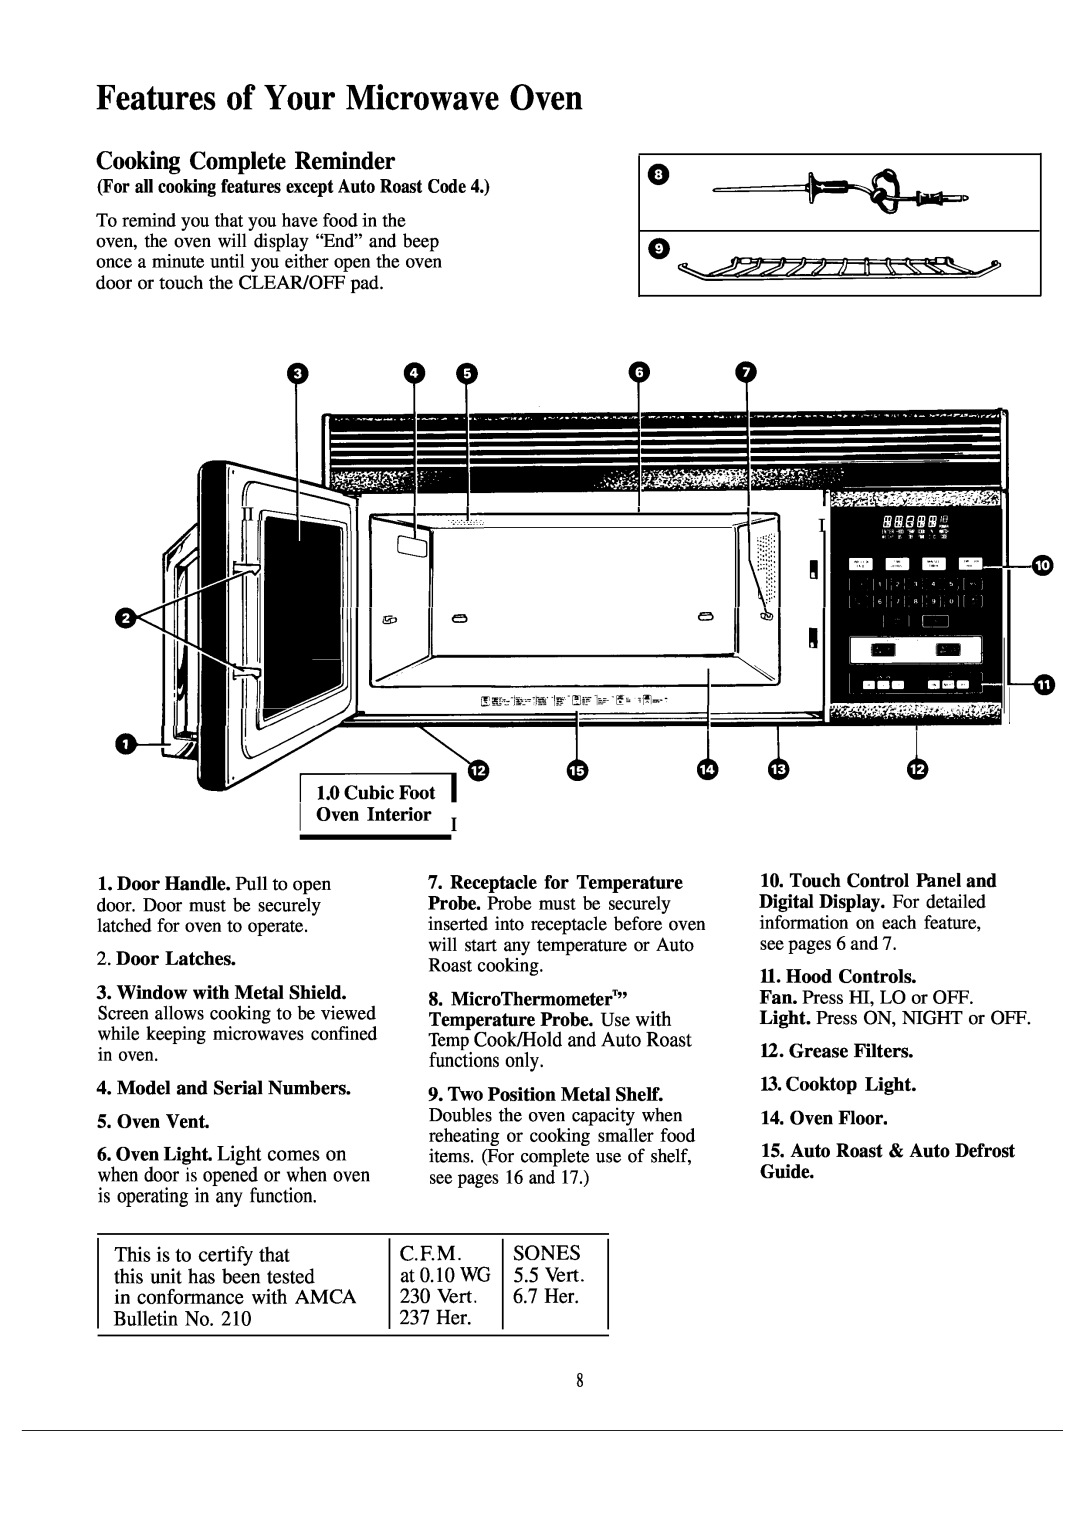 GE D2092P129, JVM140 warranty Features of Your Microwave Oven, Cooki~ Complete Reminder, “Voc”bicFoo. A 